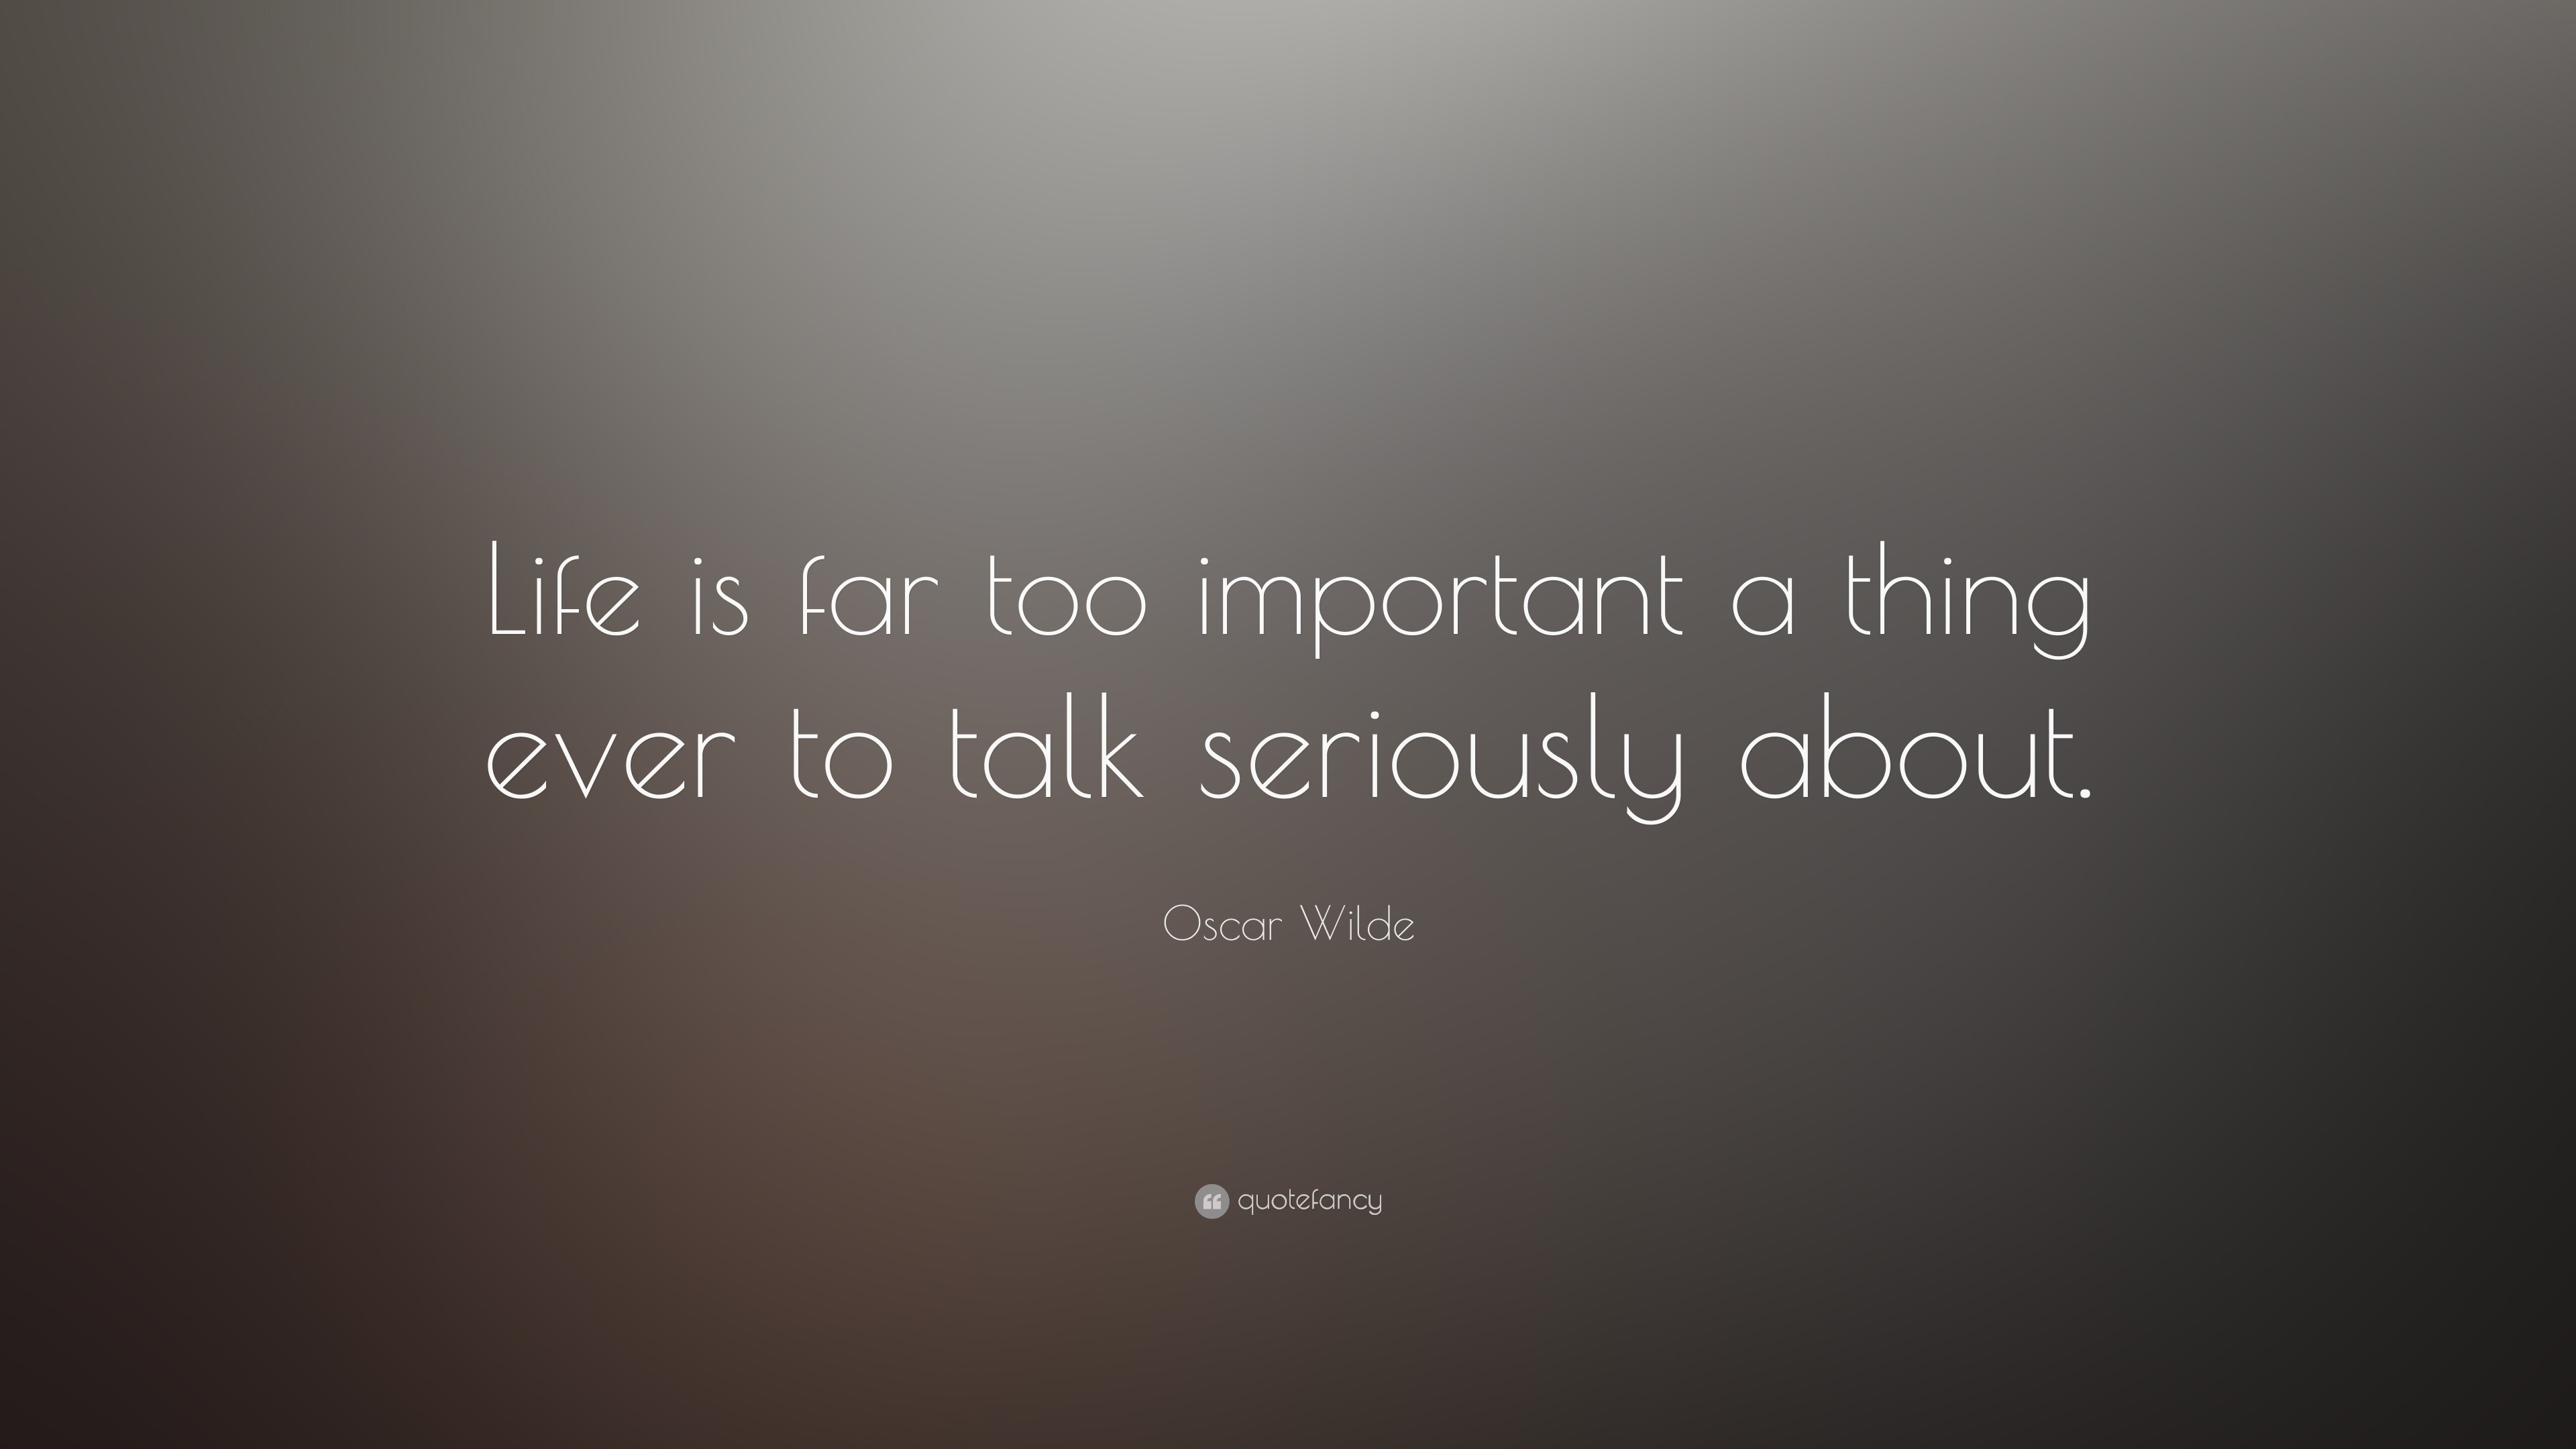 3840x2160 Life Quotes: “Life is far too important a thing ever to talk seriously about